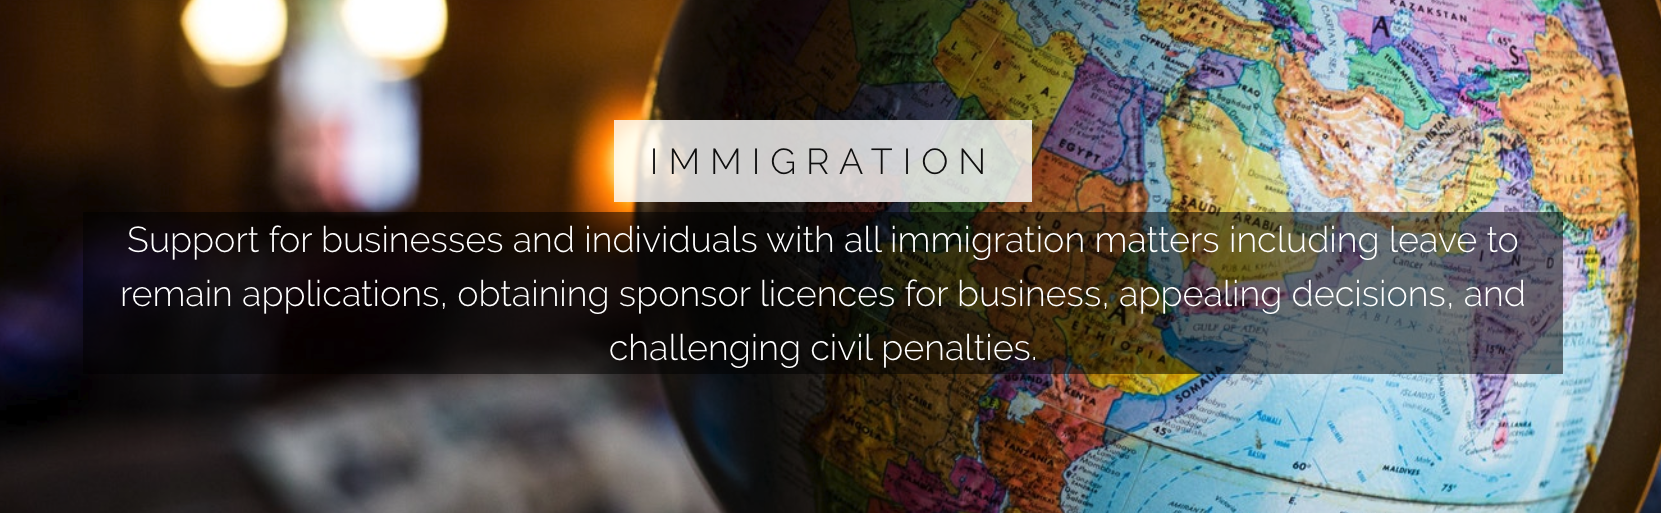 Immigration Lawyers | Immigrating Matters UK | Vestra Lawyers